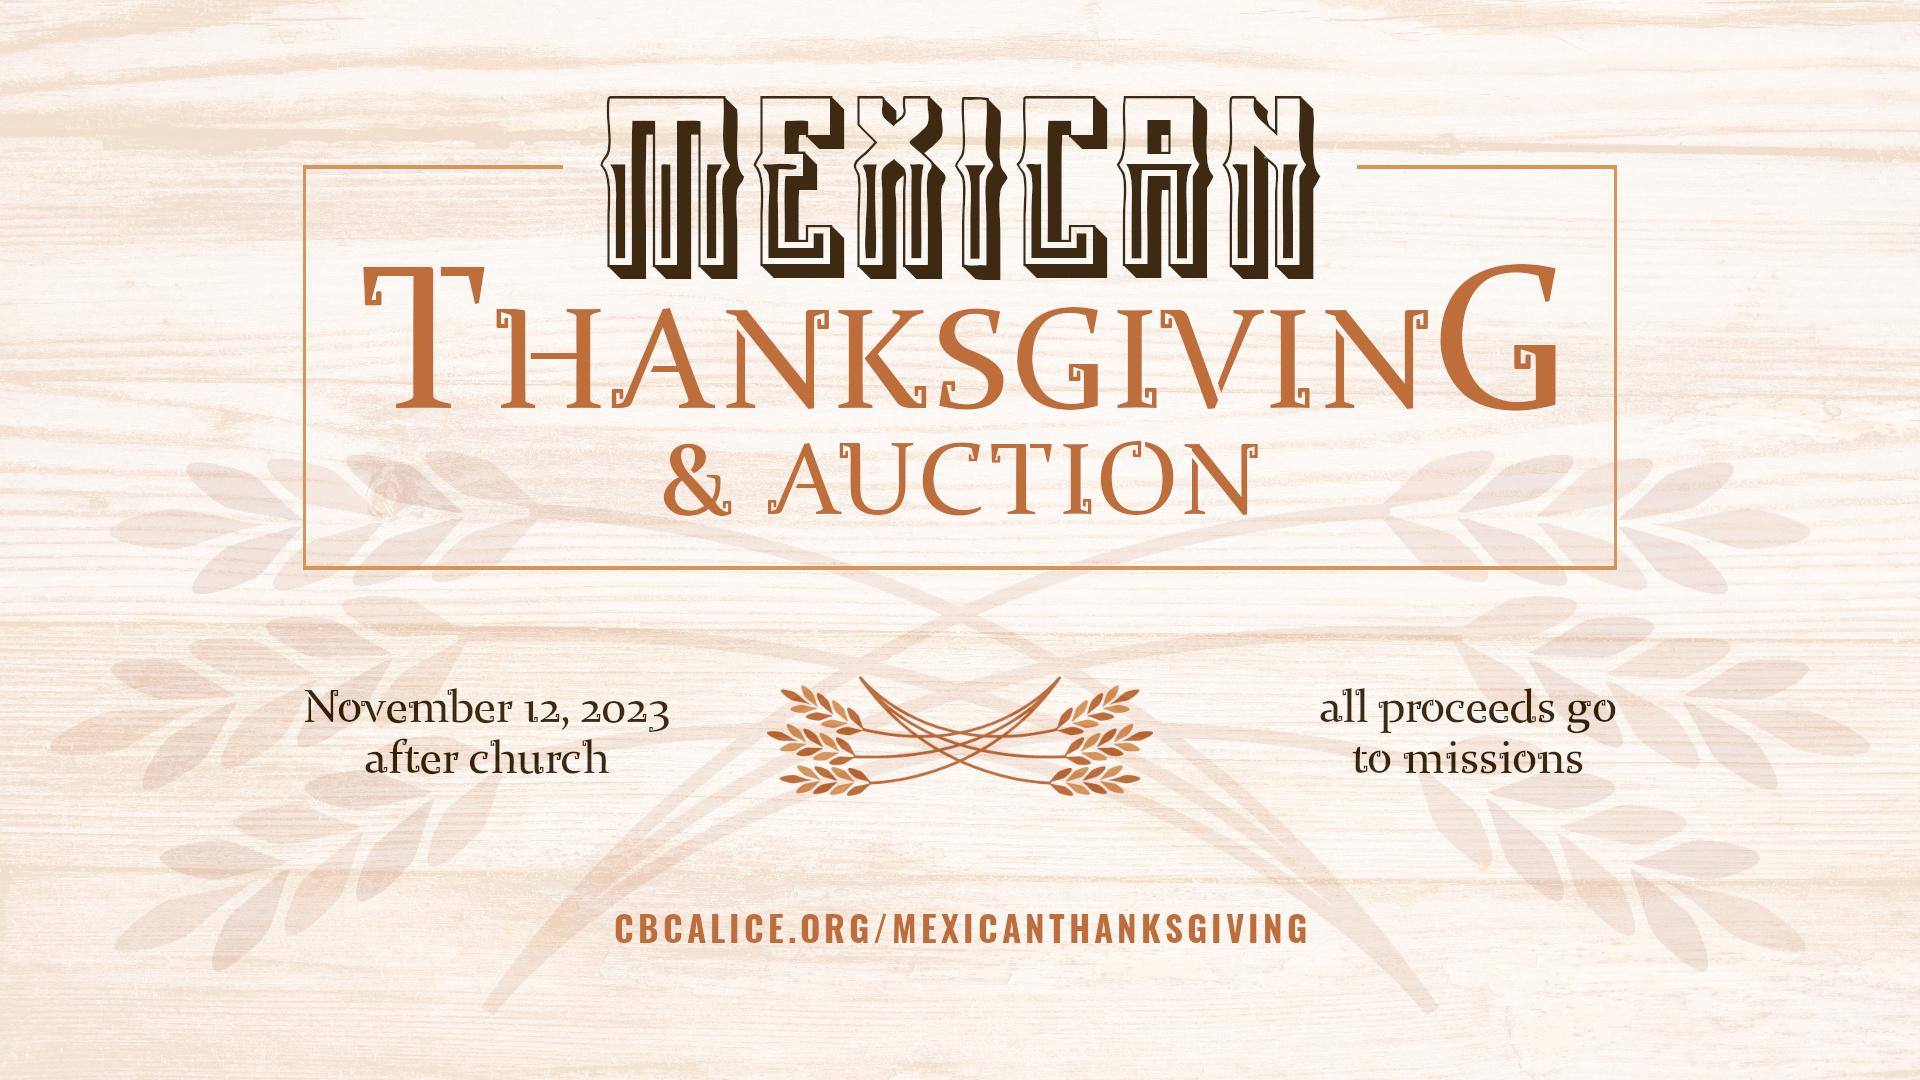 Mexican thanksgiving and auction to support missions